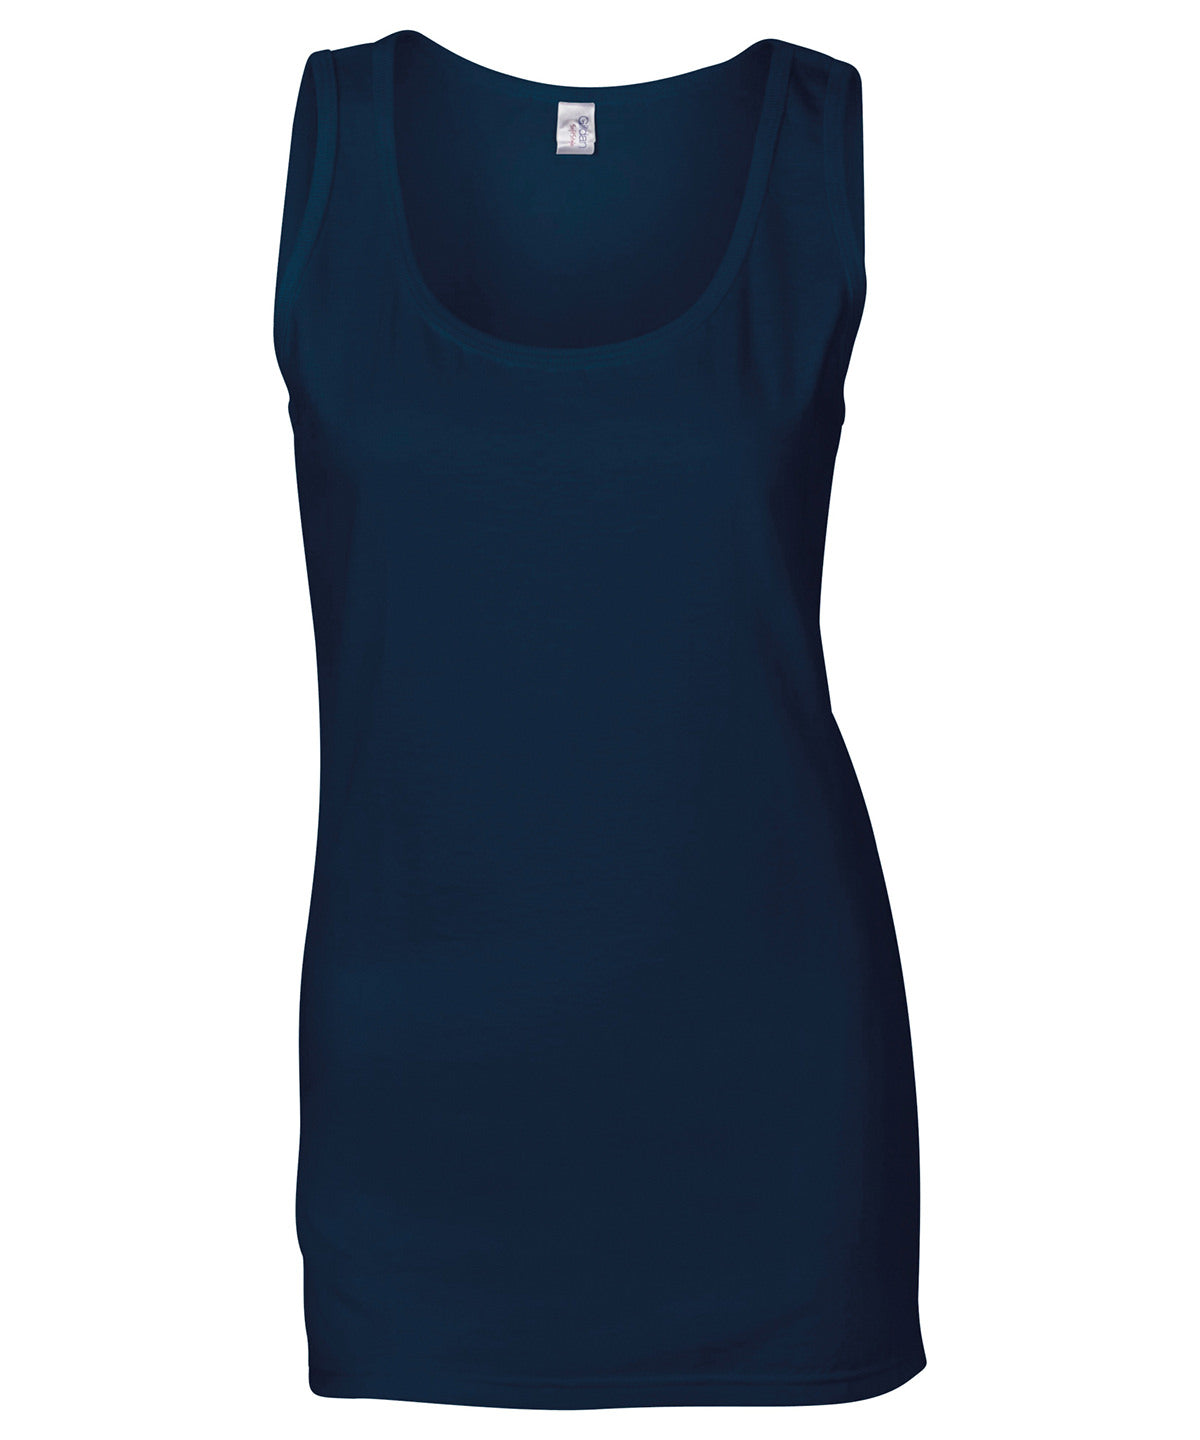 Softstyle women's tank top | Navy